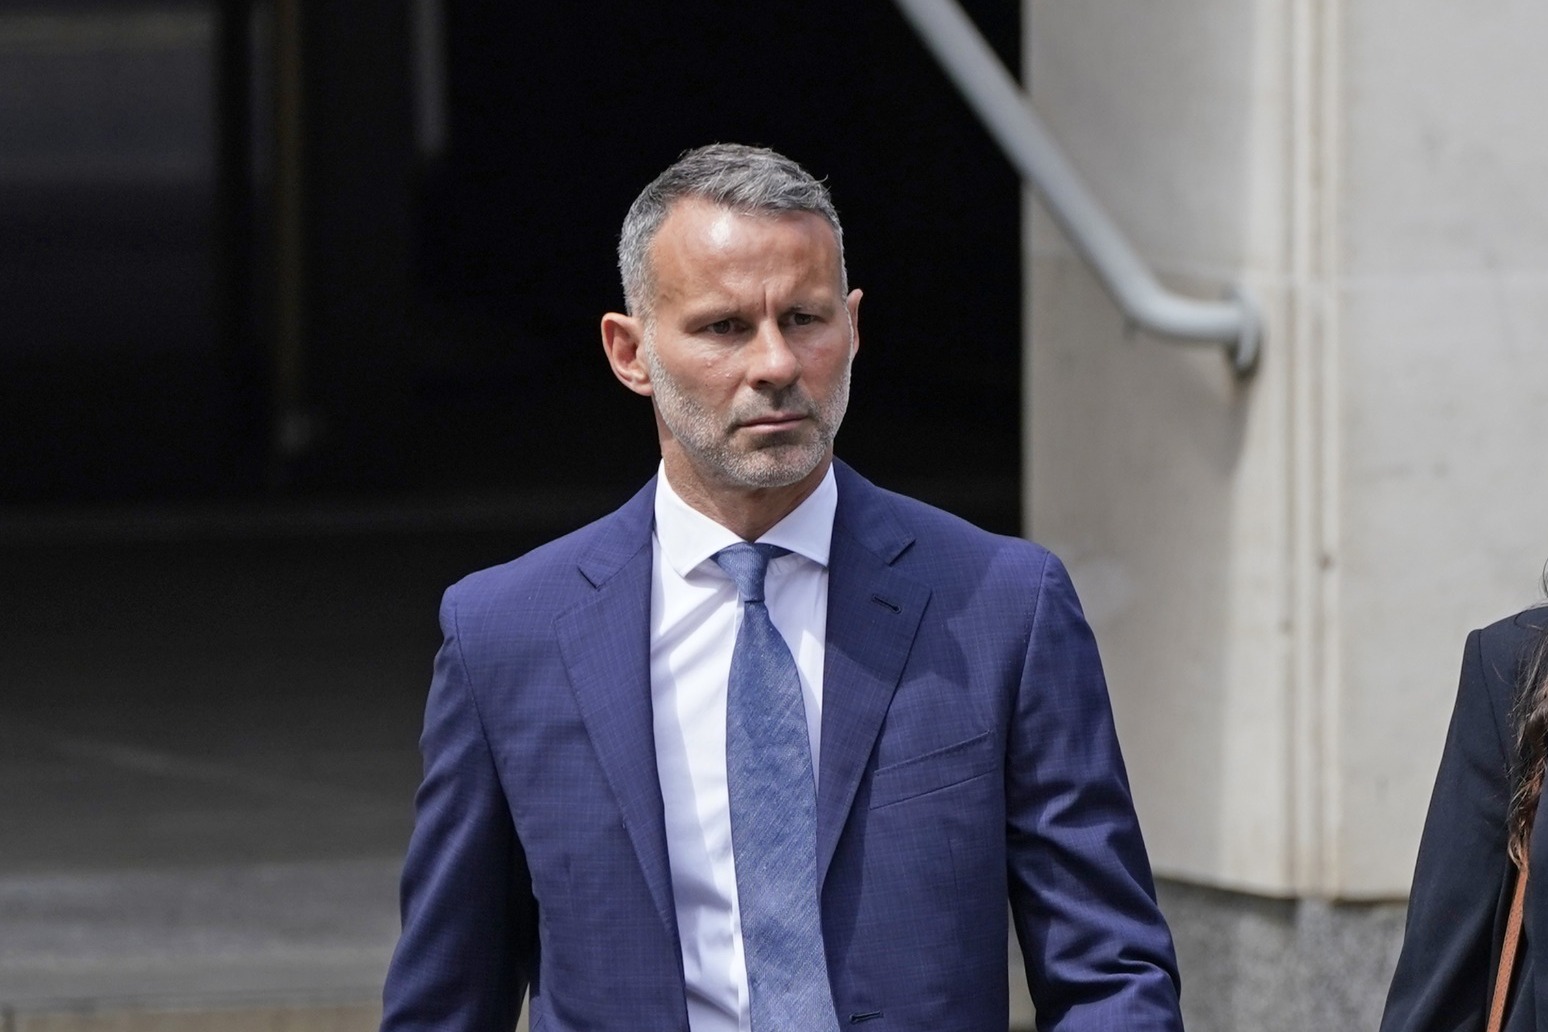 Giggs ‘kicked ex in back and threw her naked out of hotel room’, court told 